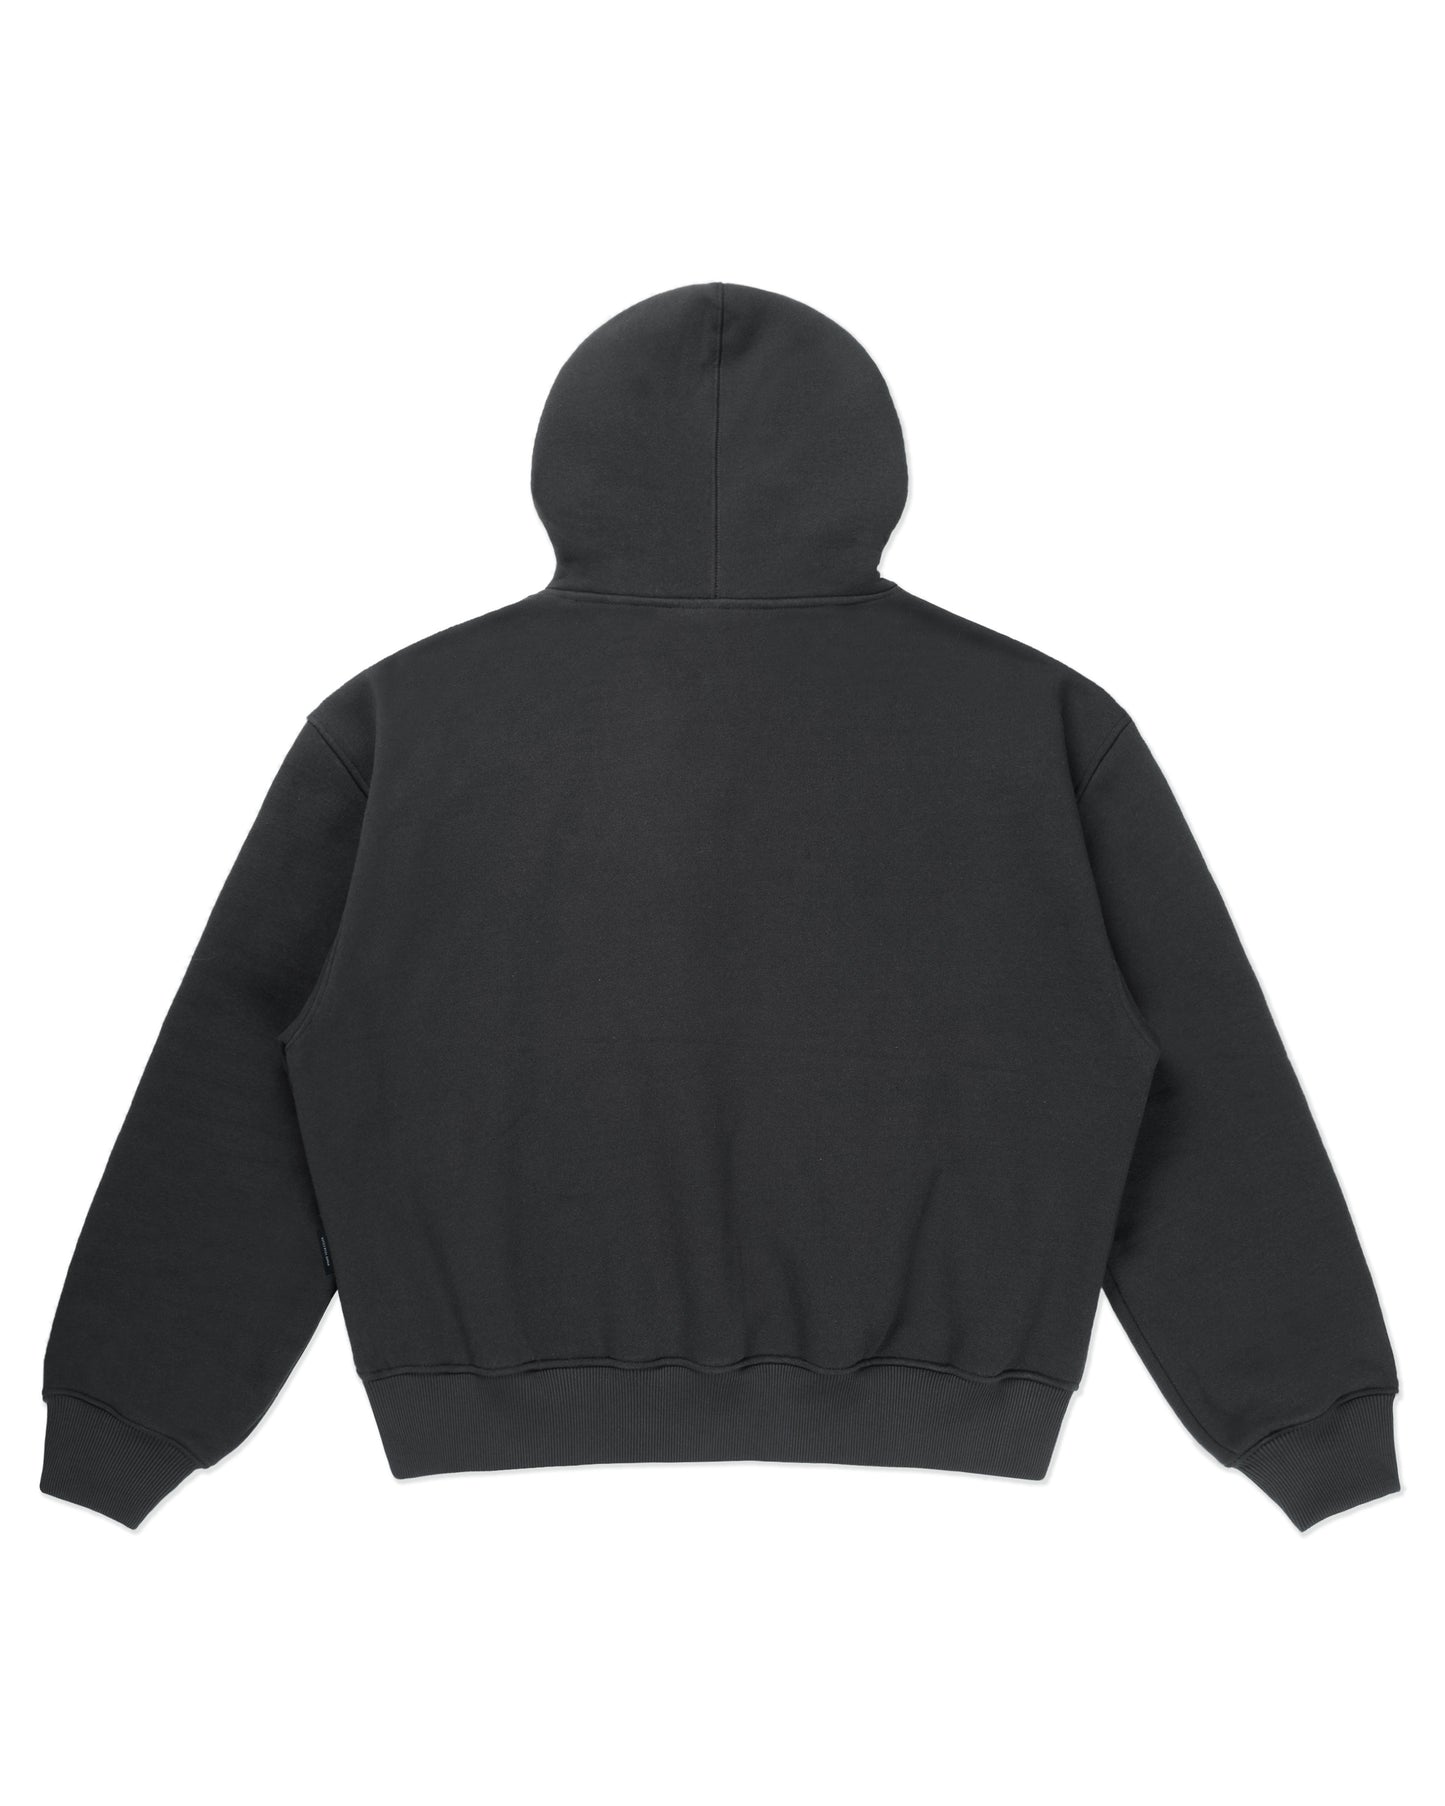 Levents® College Vibe Boxy 2.0 Hoodie/ Black